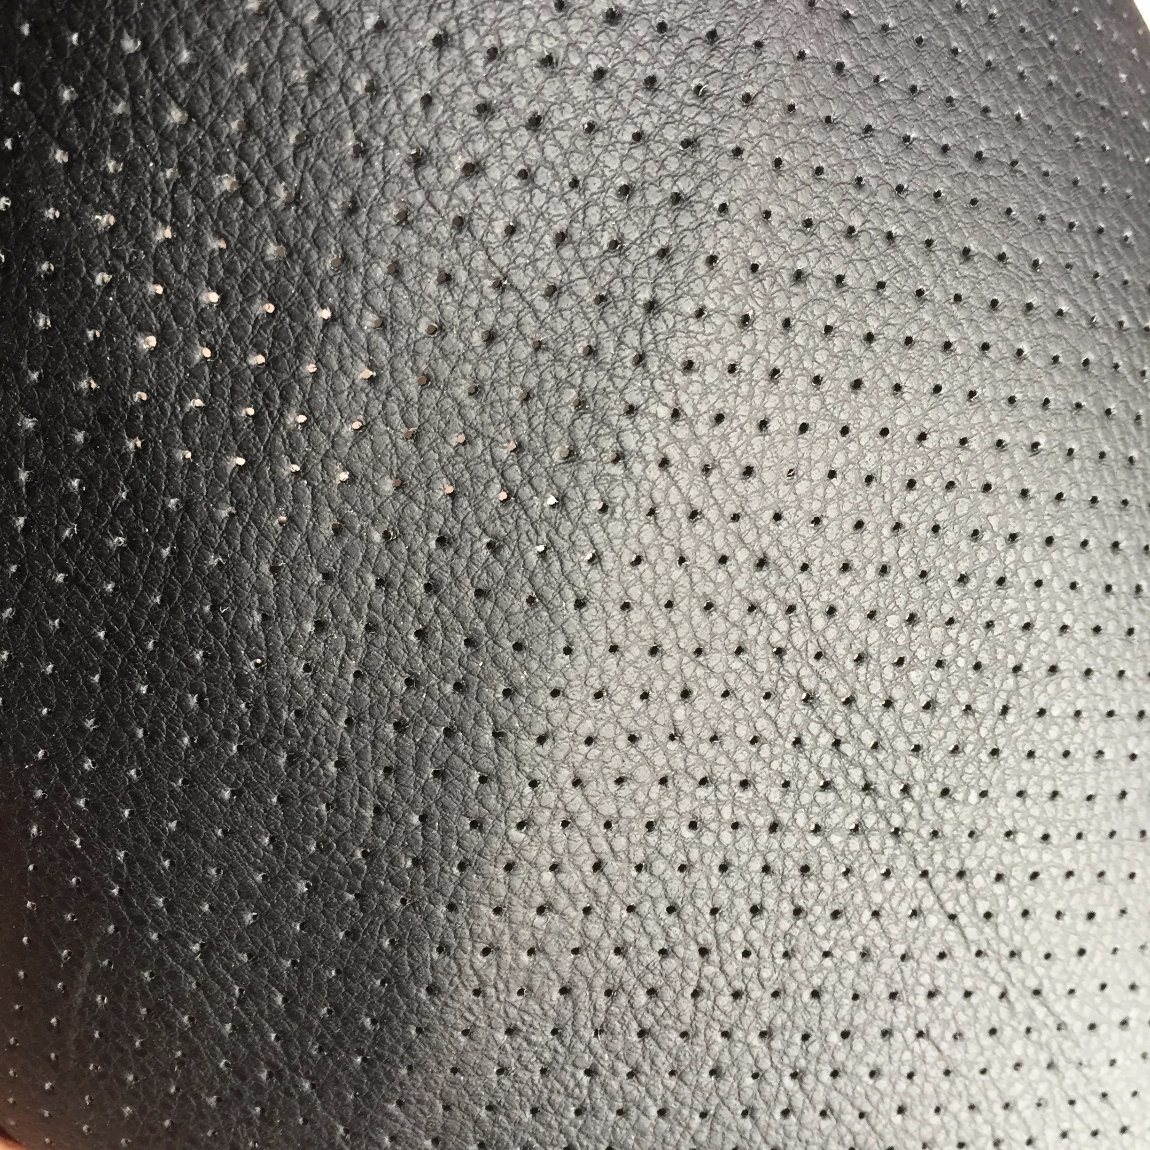 Perforate Microfiber Leather for Car Seat Covers Safety Car Seat